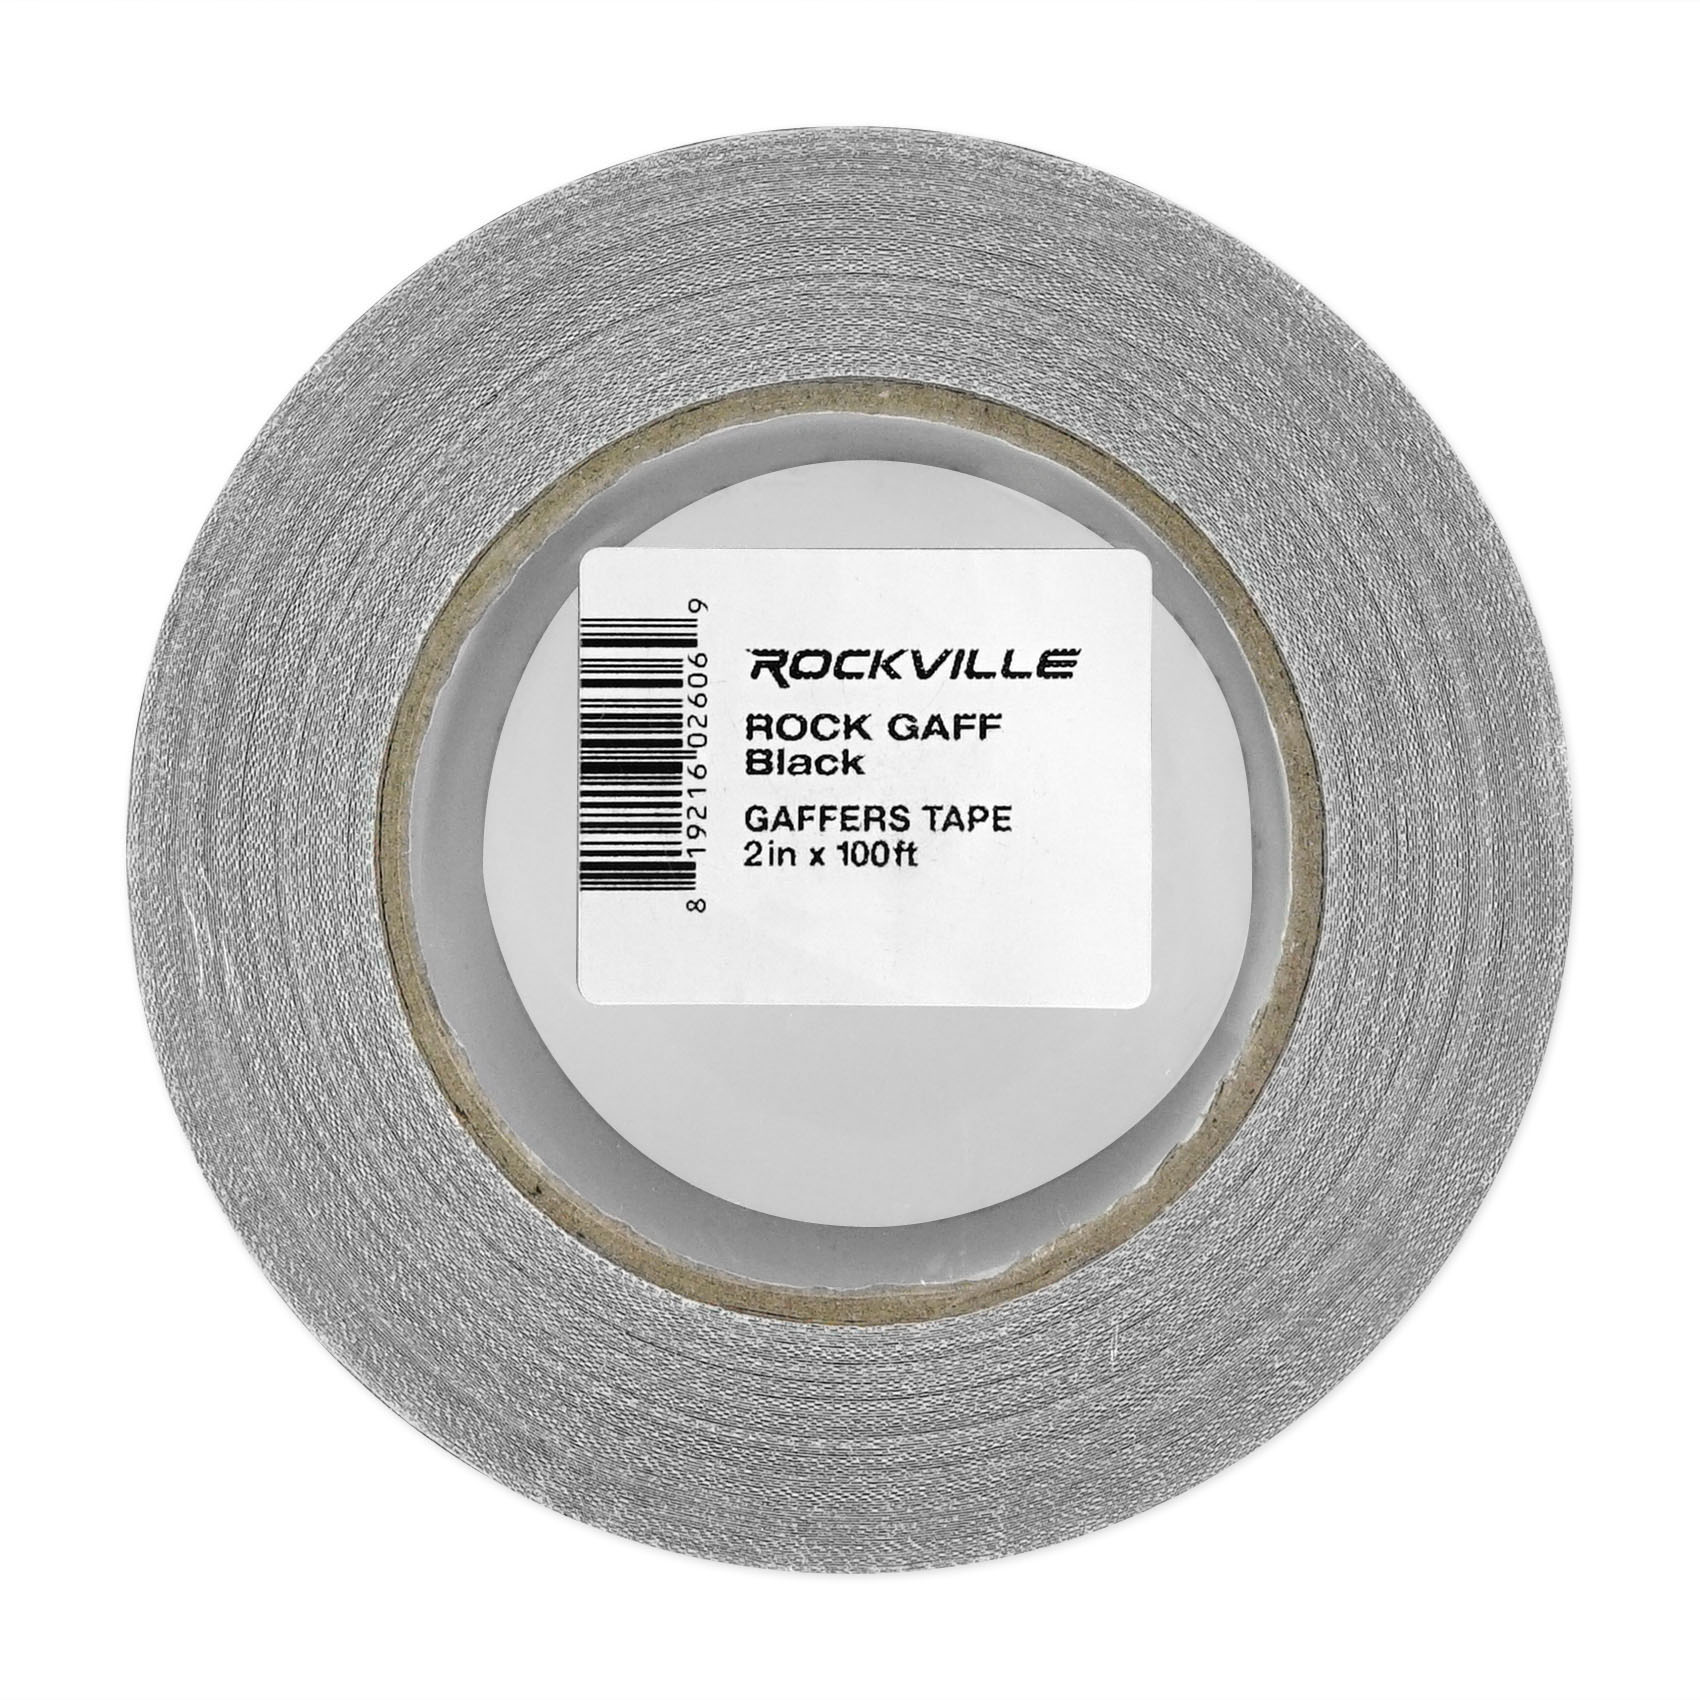 (8) Rolls Rockville Pro Audio/Stage Wire ROCK GAFF Black Gaffers Tape 2"x100 Ft - image 4 of 8